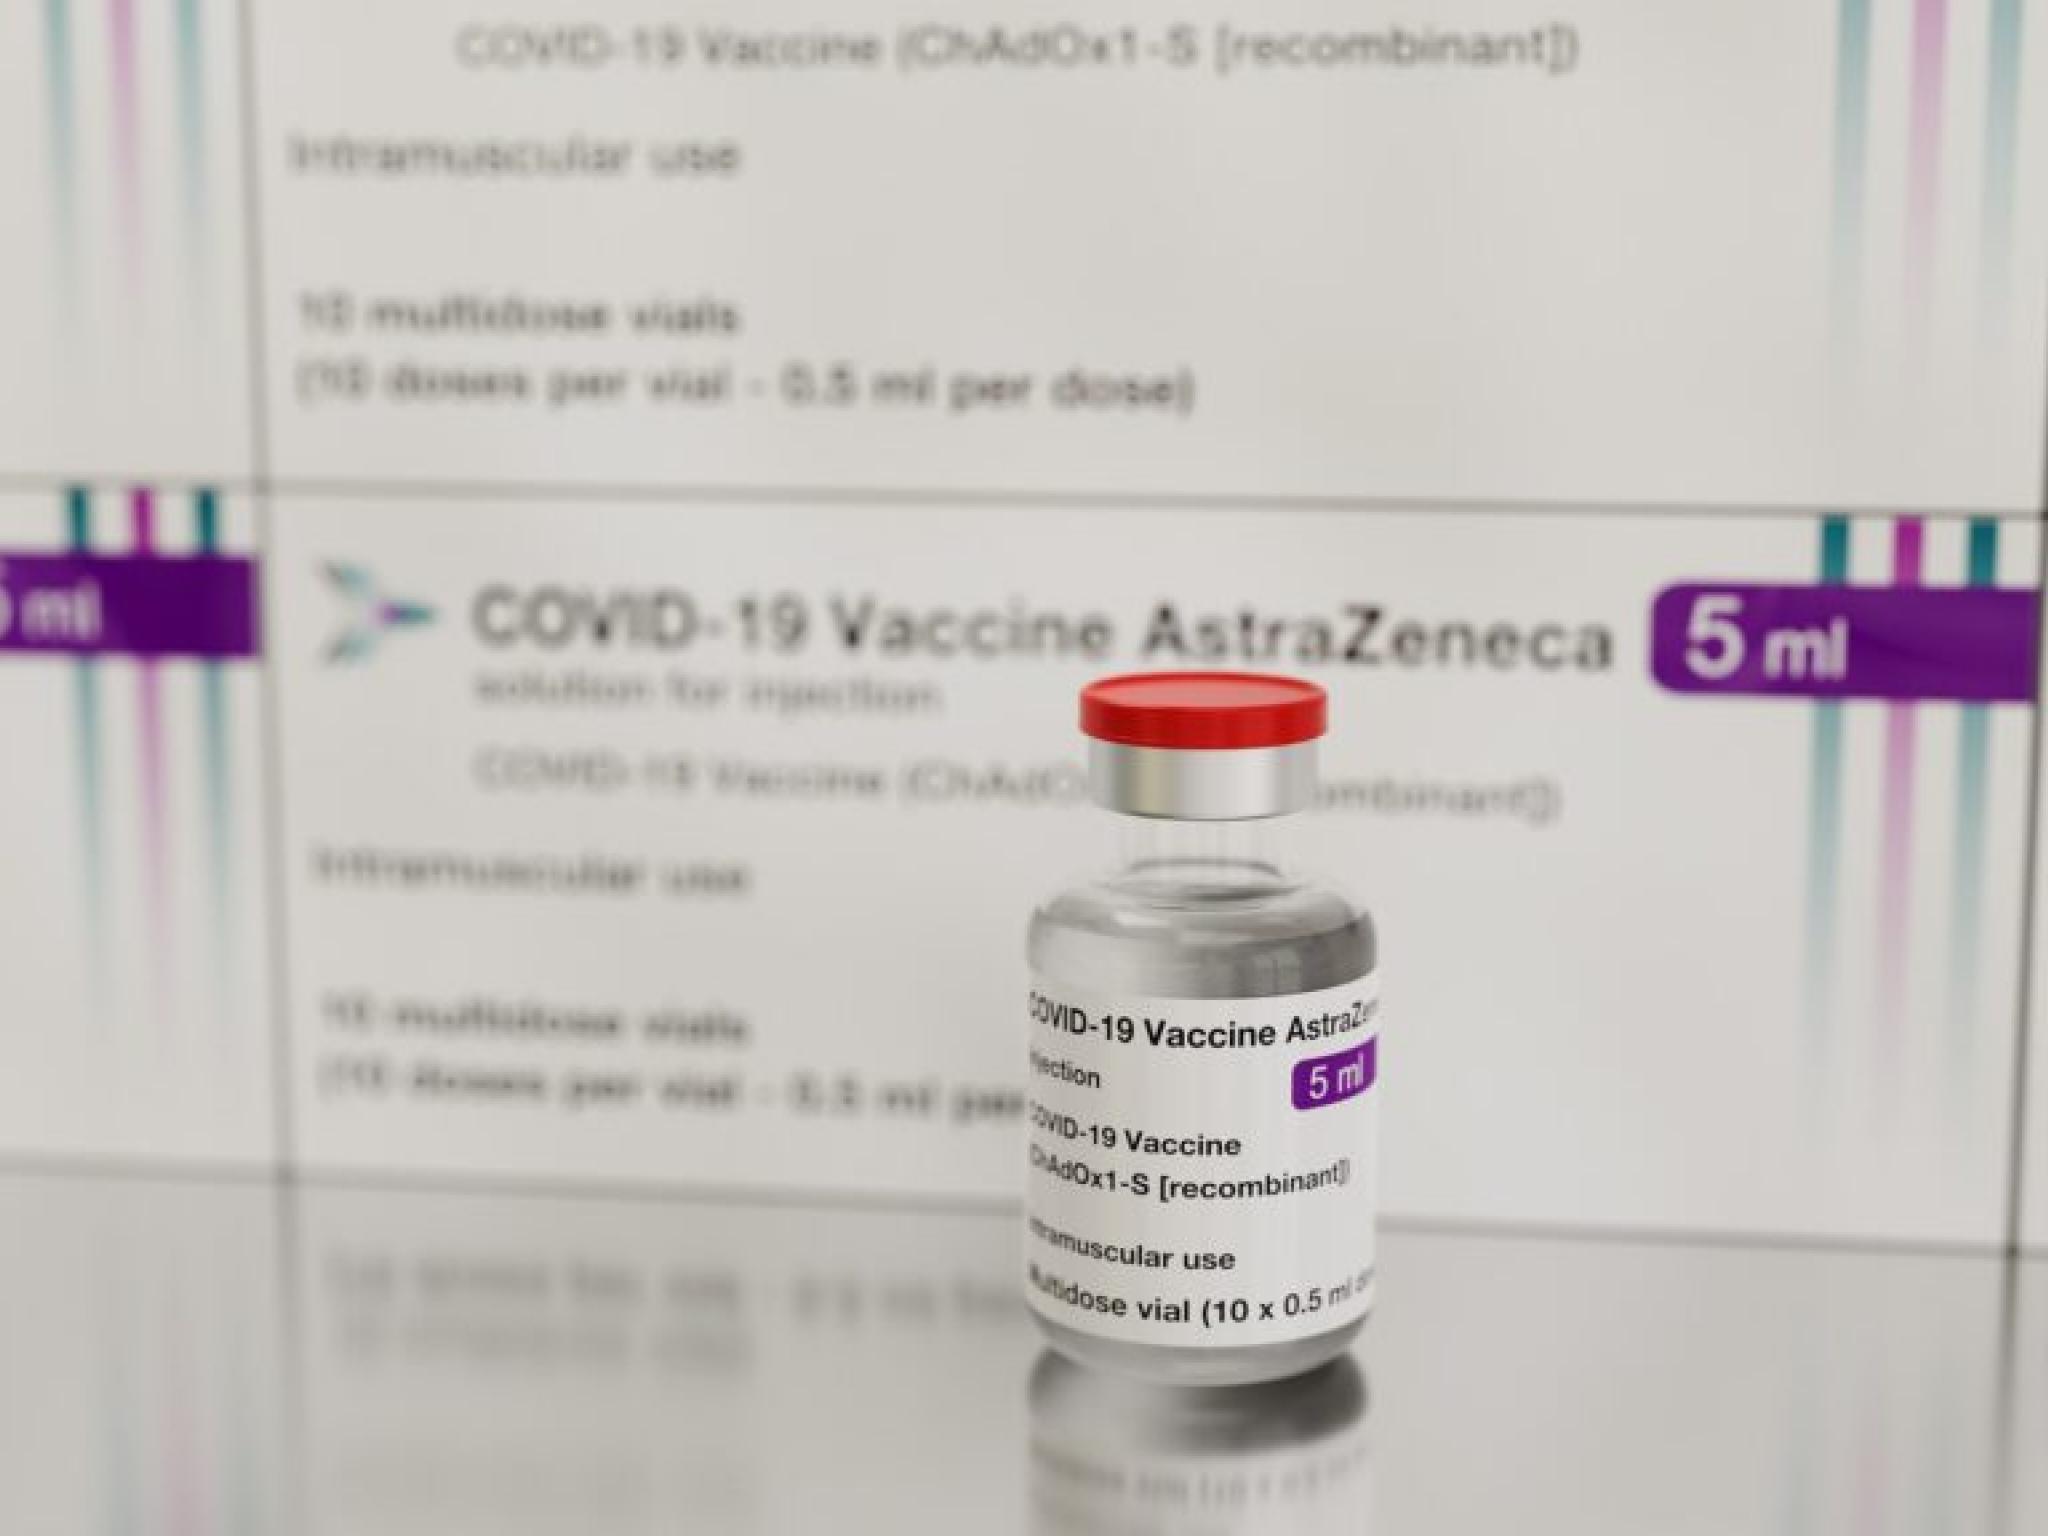  astrazeneca-admits-its-covid-19-vaccine-may-cause-blood-clotting-side-effect-in-very-rare-case-but-causal-mechanism-unknown 